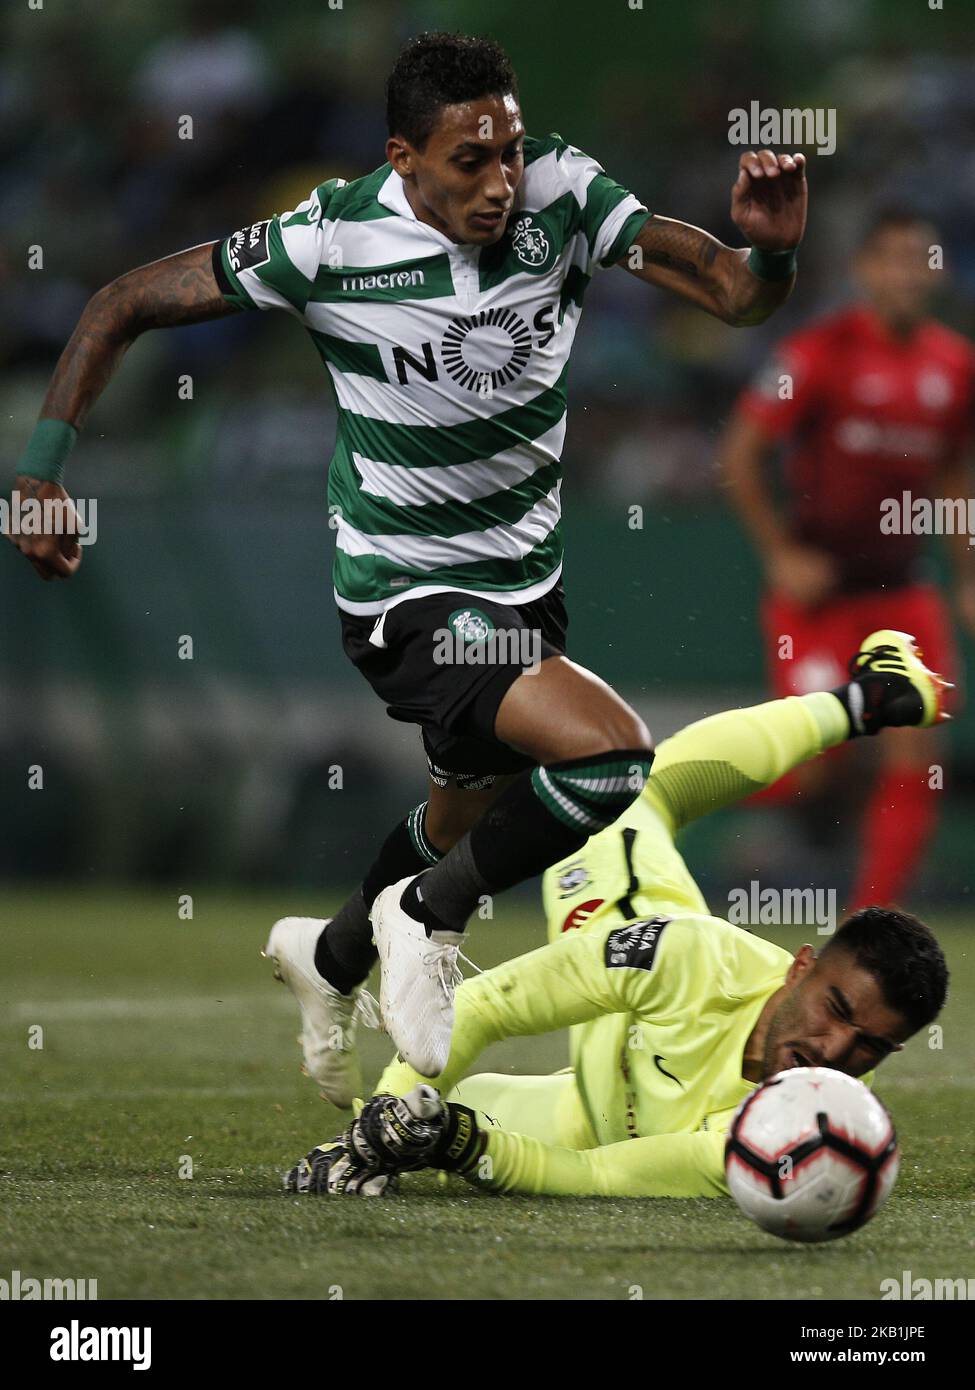 Raphinha of Sporting (L) vies for the ball with Amir Abedzadeh of Maritimo (R) during Primeira Liga 2018/19 match between Sporting CP vs CS Maritimo, in Lisbon, on September 29, 2018. (Photo by Carlos Palma/NurPhoto) Stock Photo